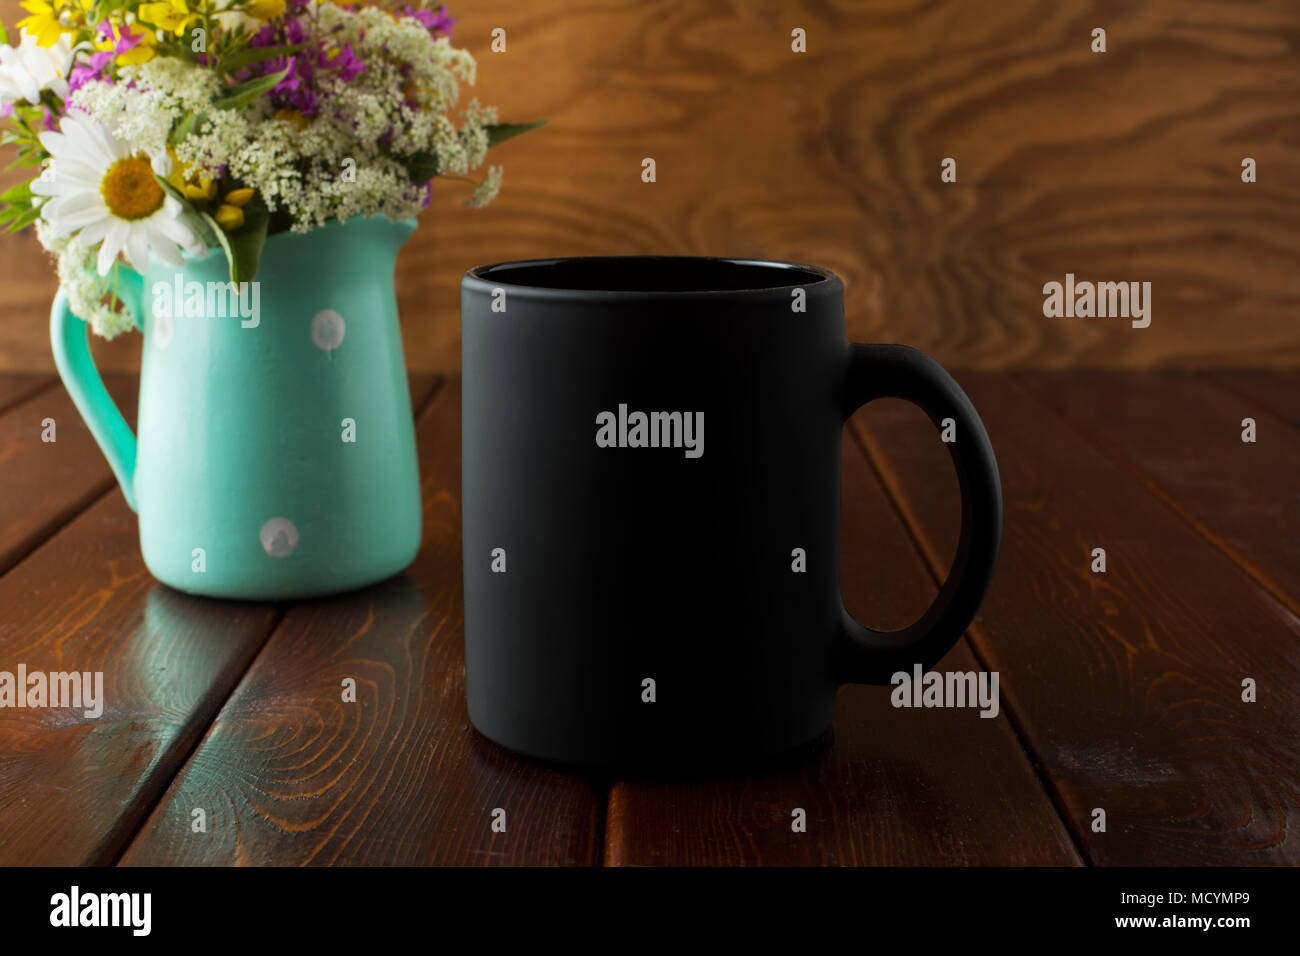 Black coffee mug rustic mockup with purple, yellow and white wildflowers in the mint green polka dot pitcher vase. Empty mug mock up for brand promoti Stock Photo